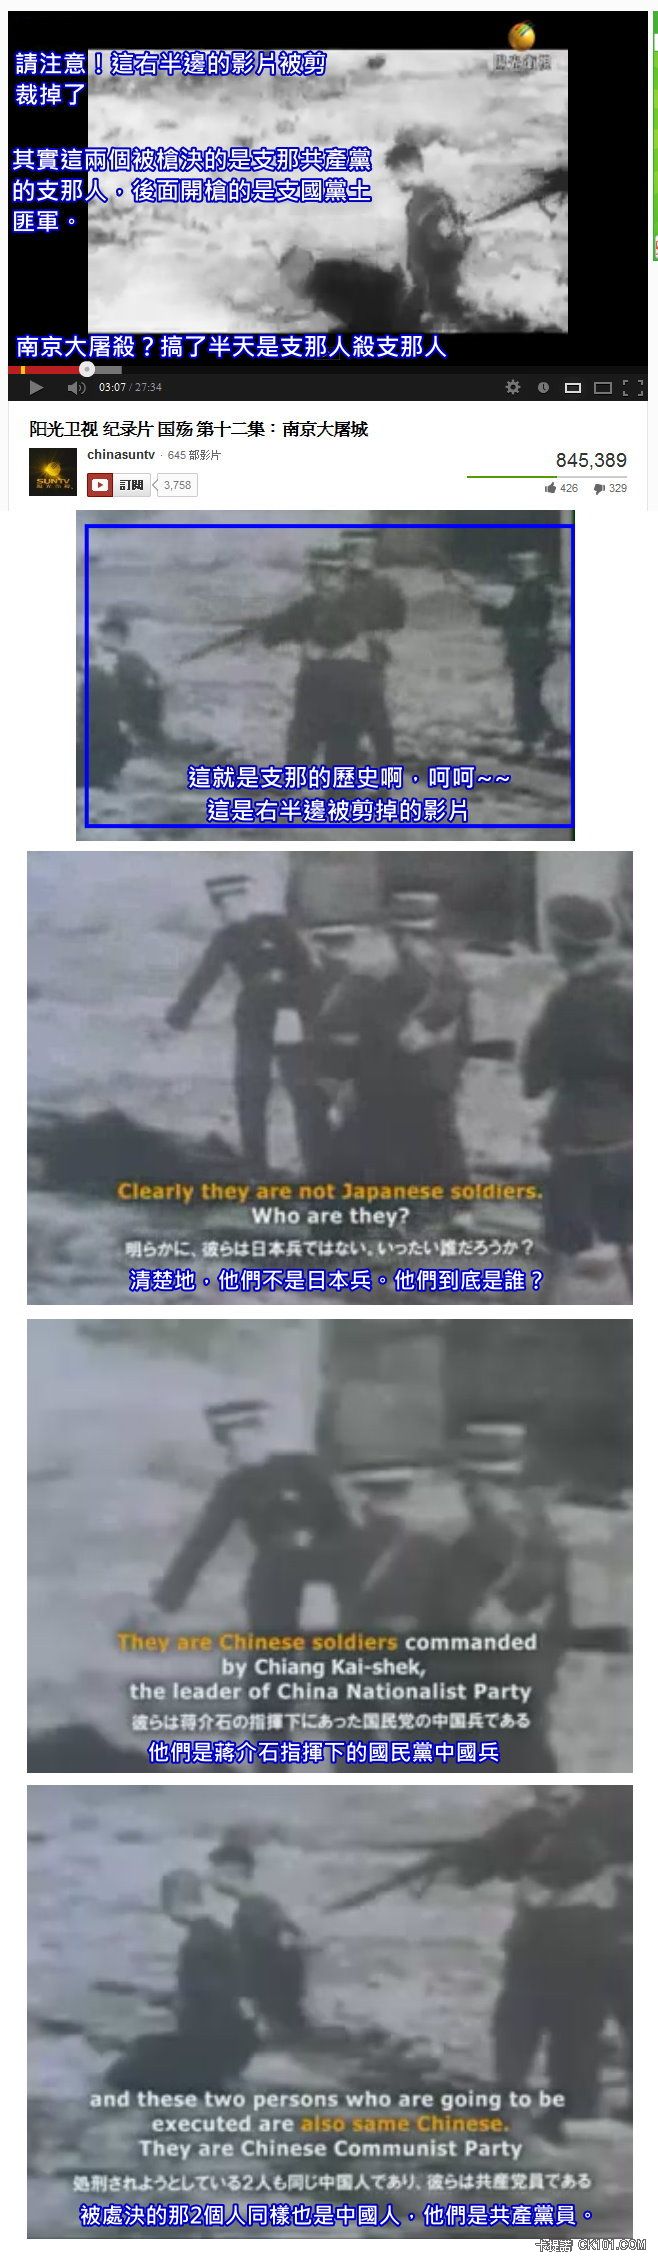 The-Fake-of-Nanking-made-in-china(KMT&CCP).jpg